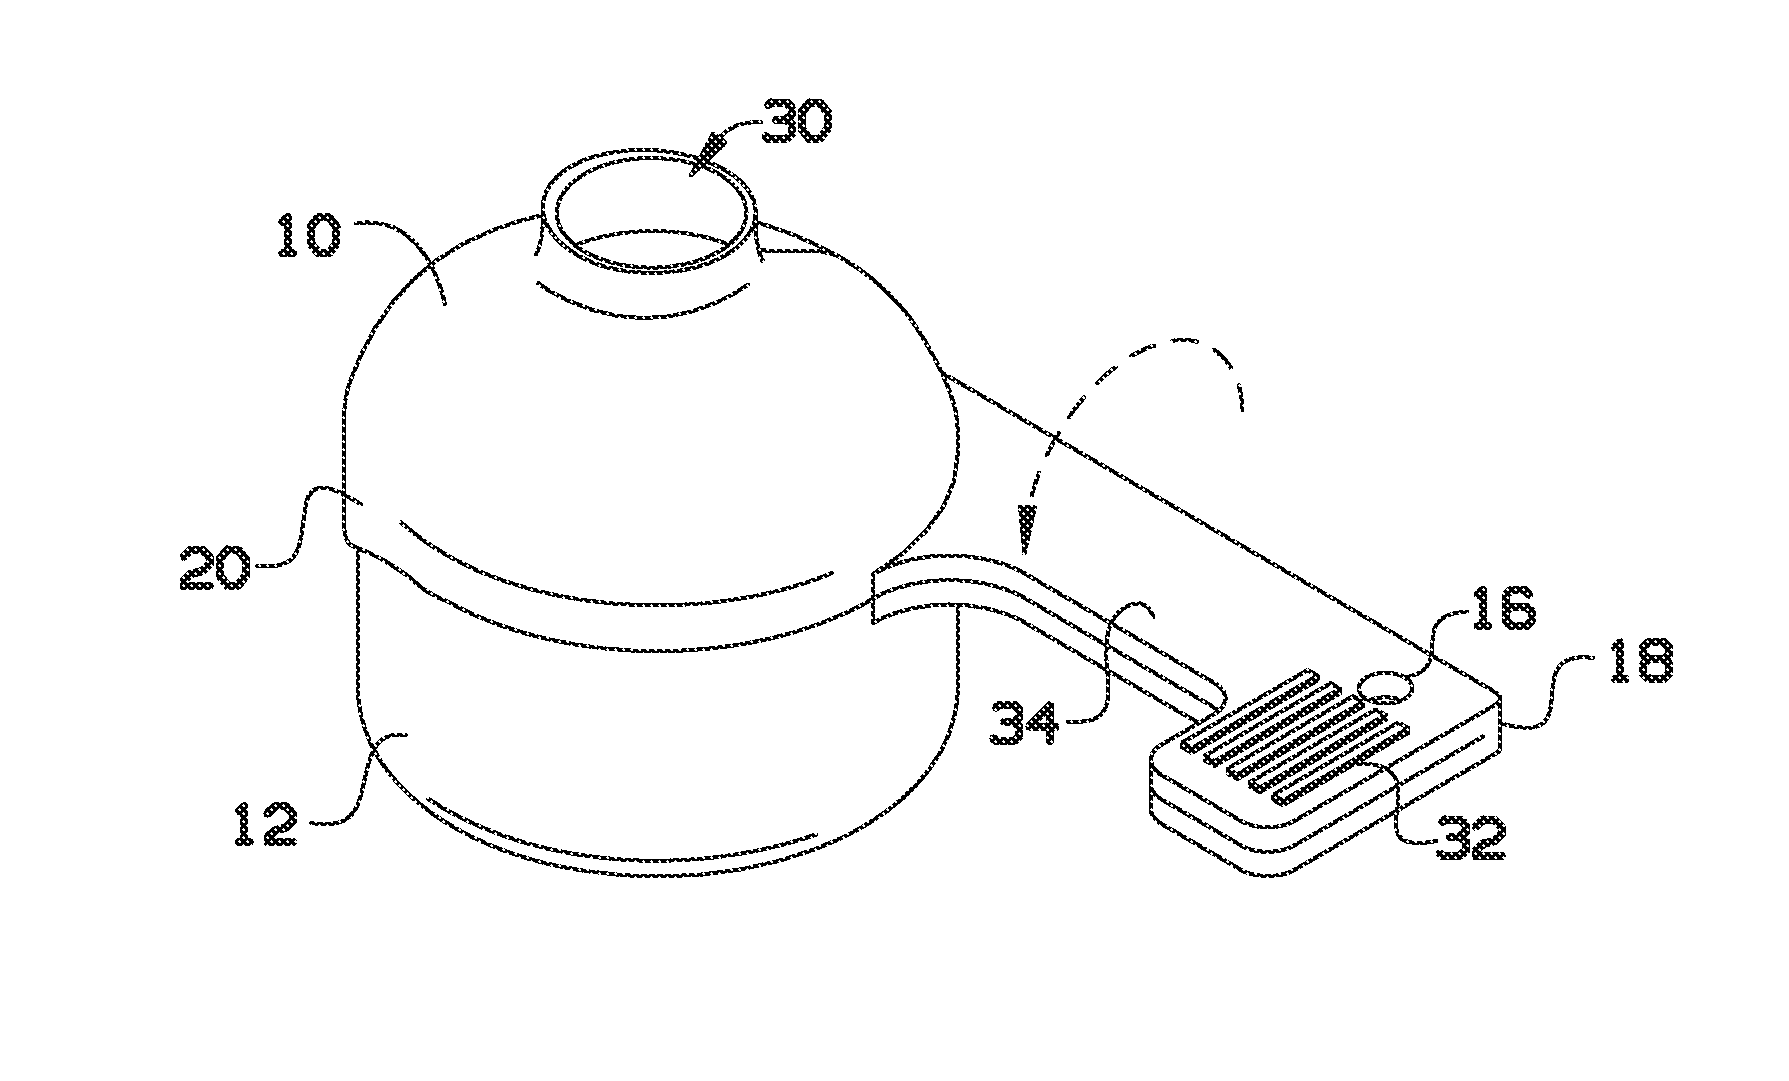 Utensil with scoop and funnel for transferring ingredients